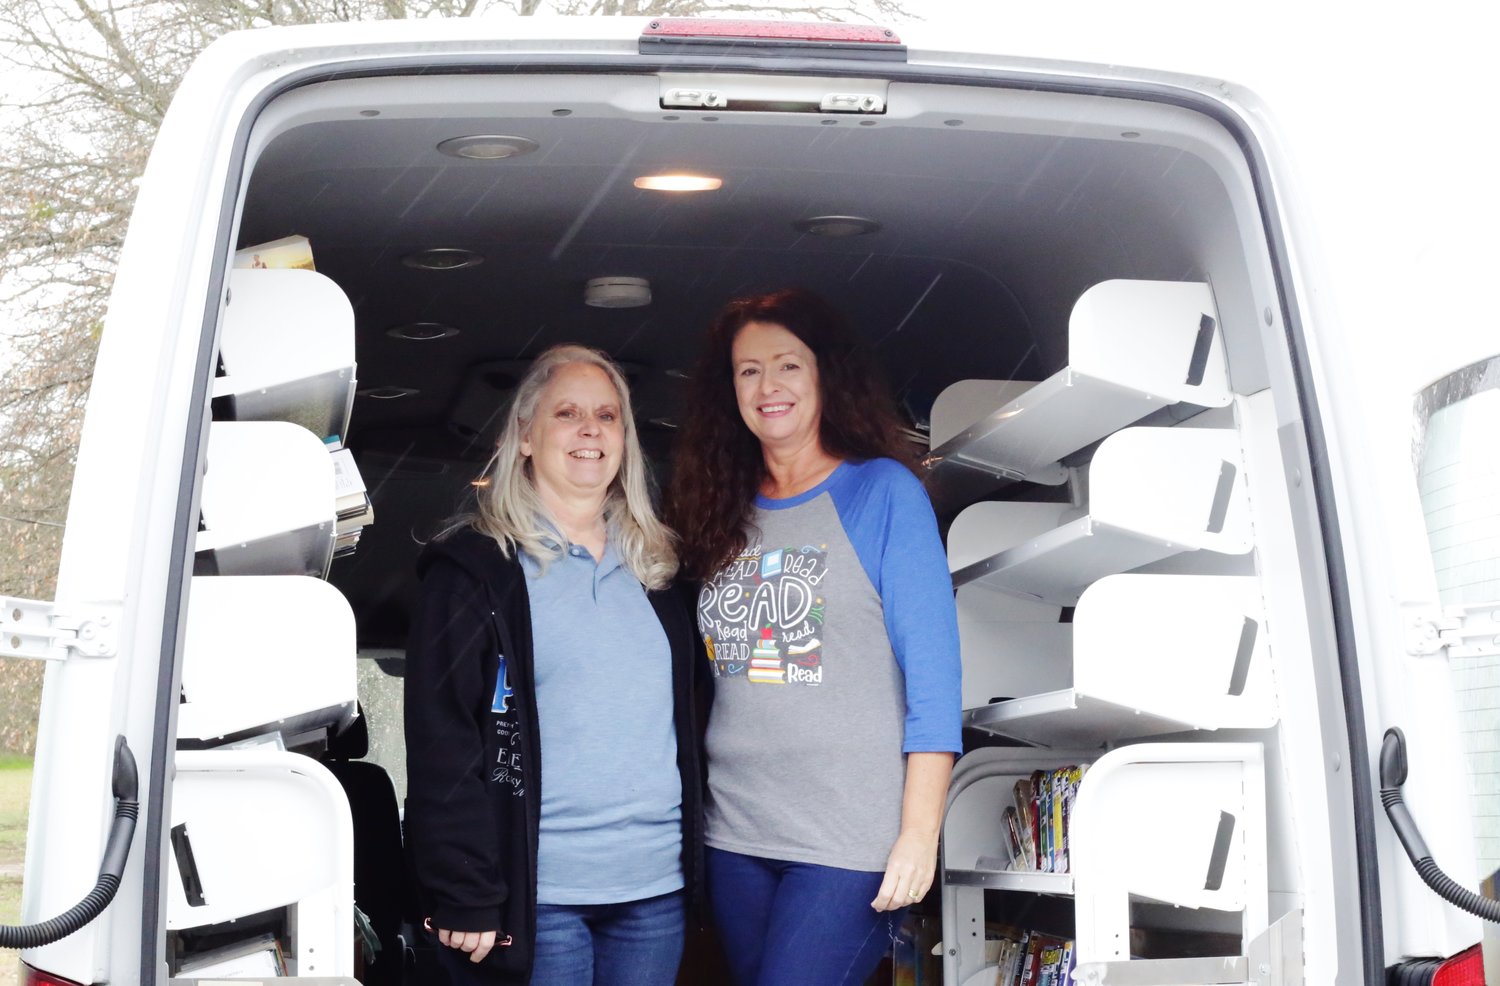 Librarian Mary Hurley (left) and Pam Hortman in the van after securing the books from a recent visit.